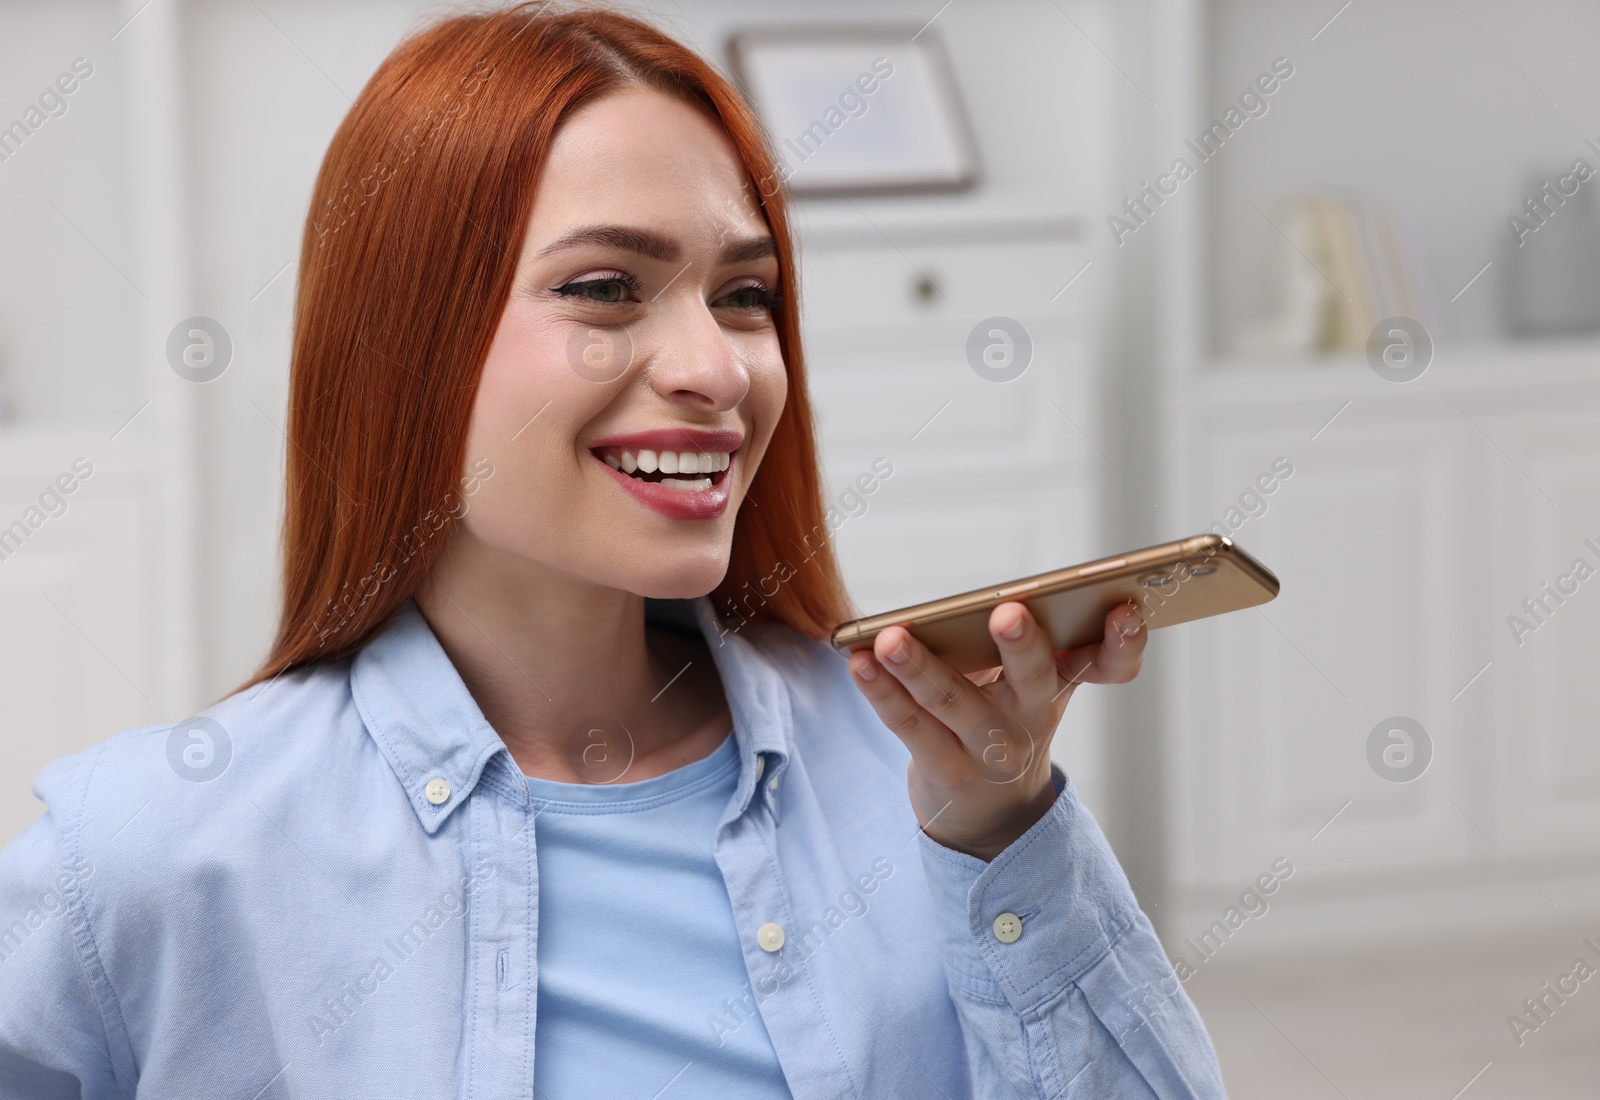 Photo of Happy woman sending voice message via smartphone at home